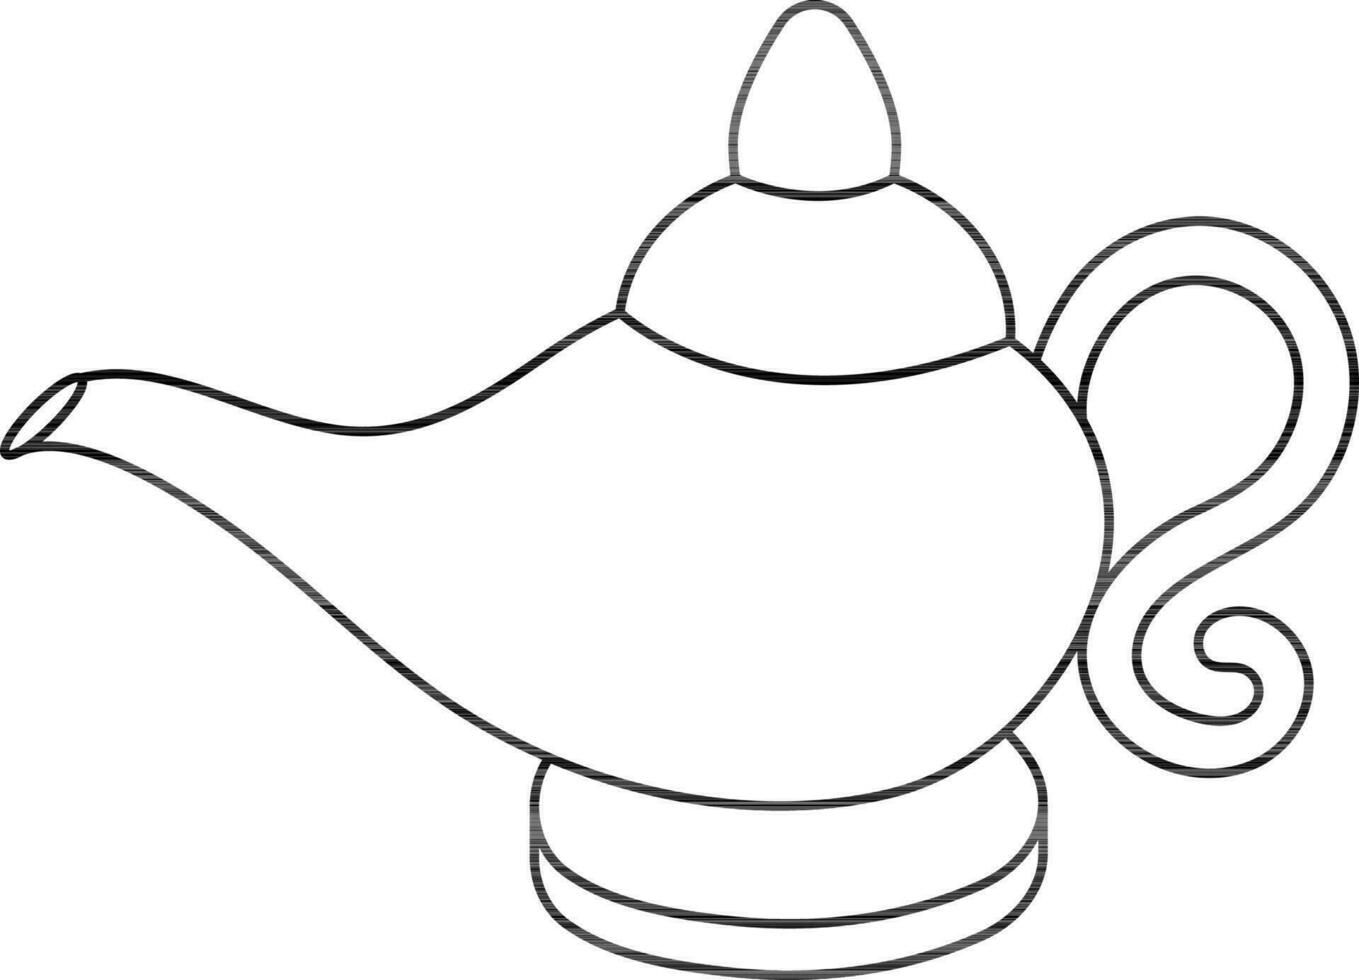 Outline Aladdin Lamp icon in flat style. vector